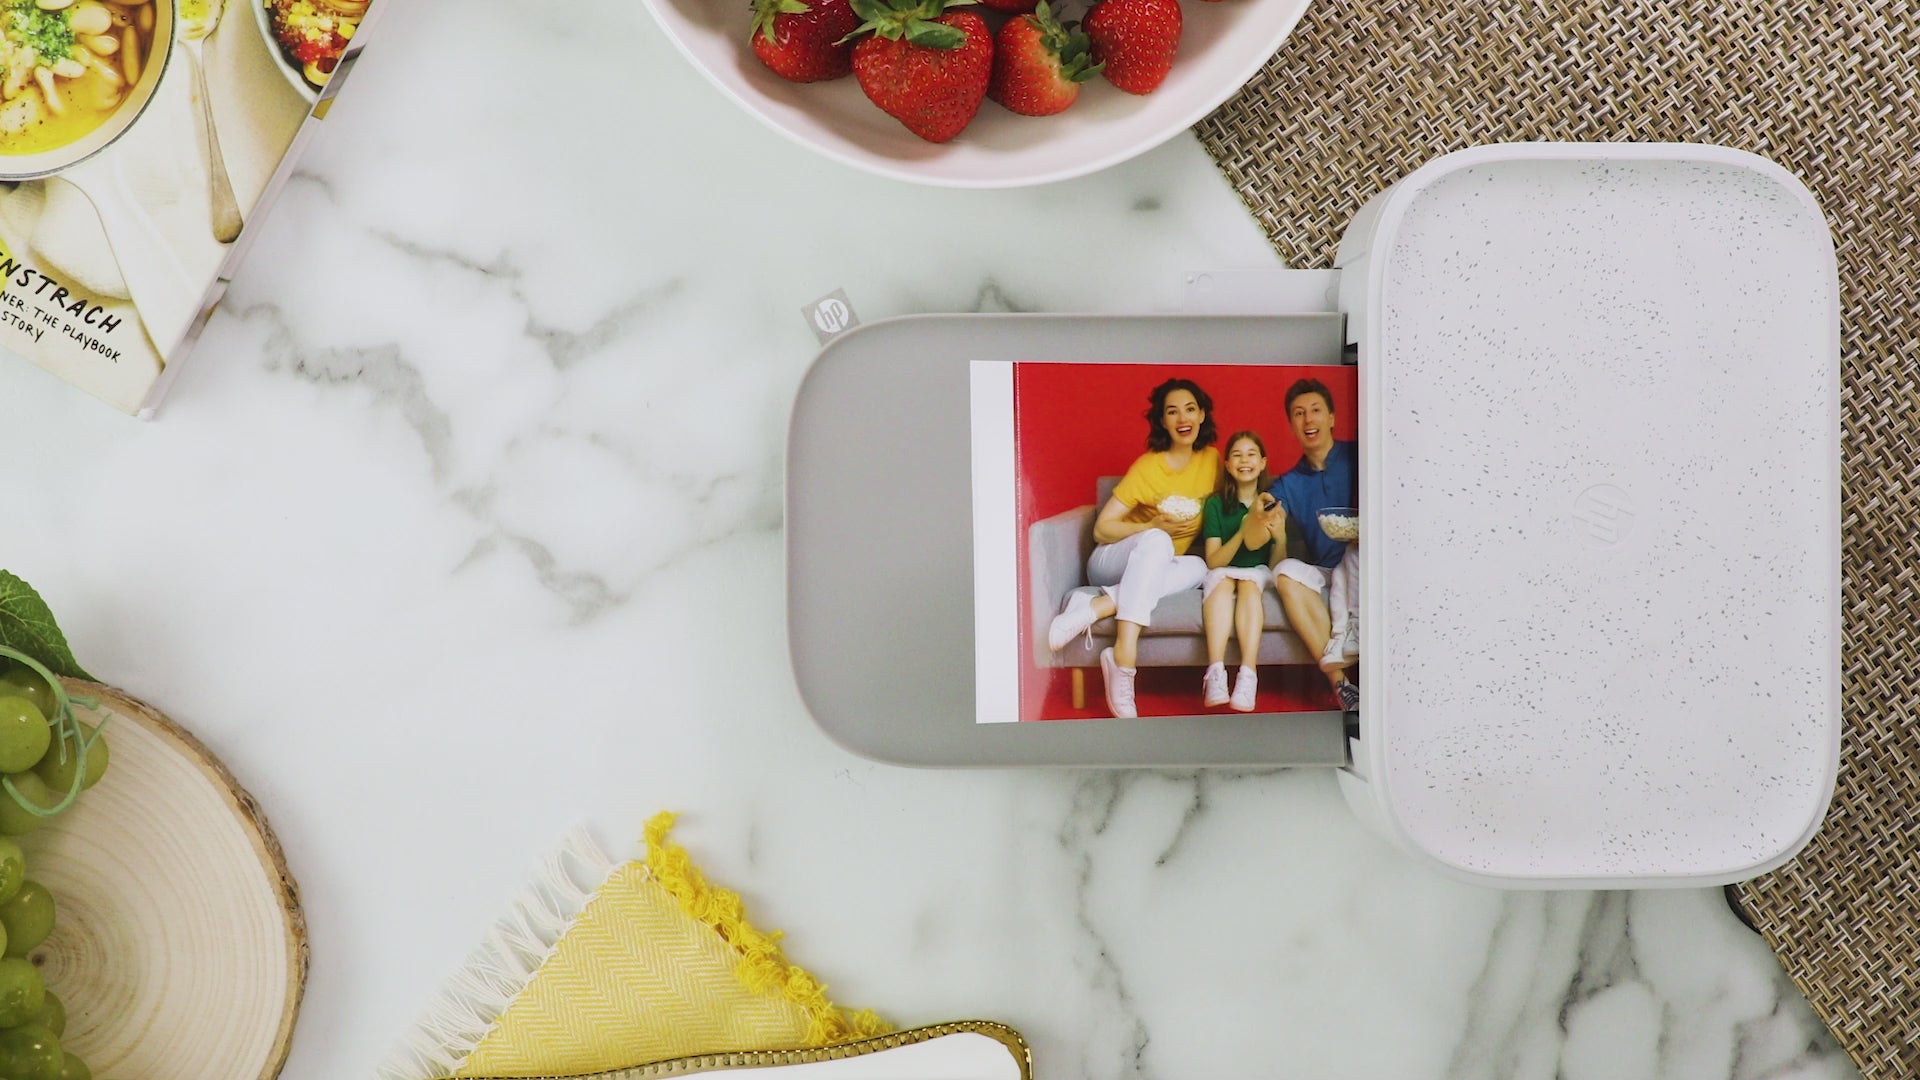 HP Sprocket Studio Plus WiFi Printer – Wirelessly Prints 4x6” Photos from  Your iOS & Android Device, White